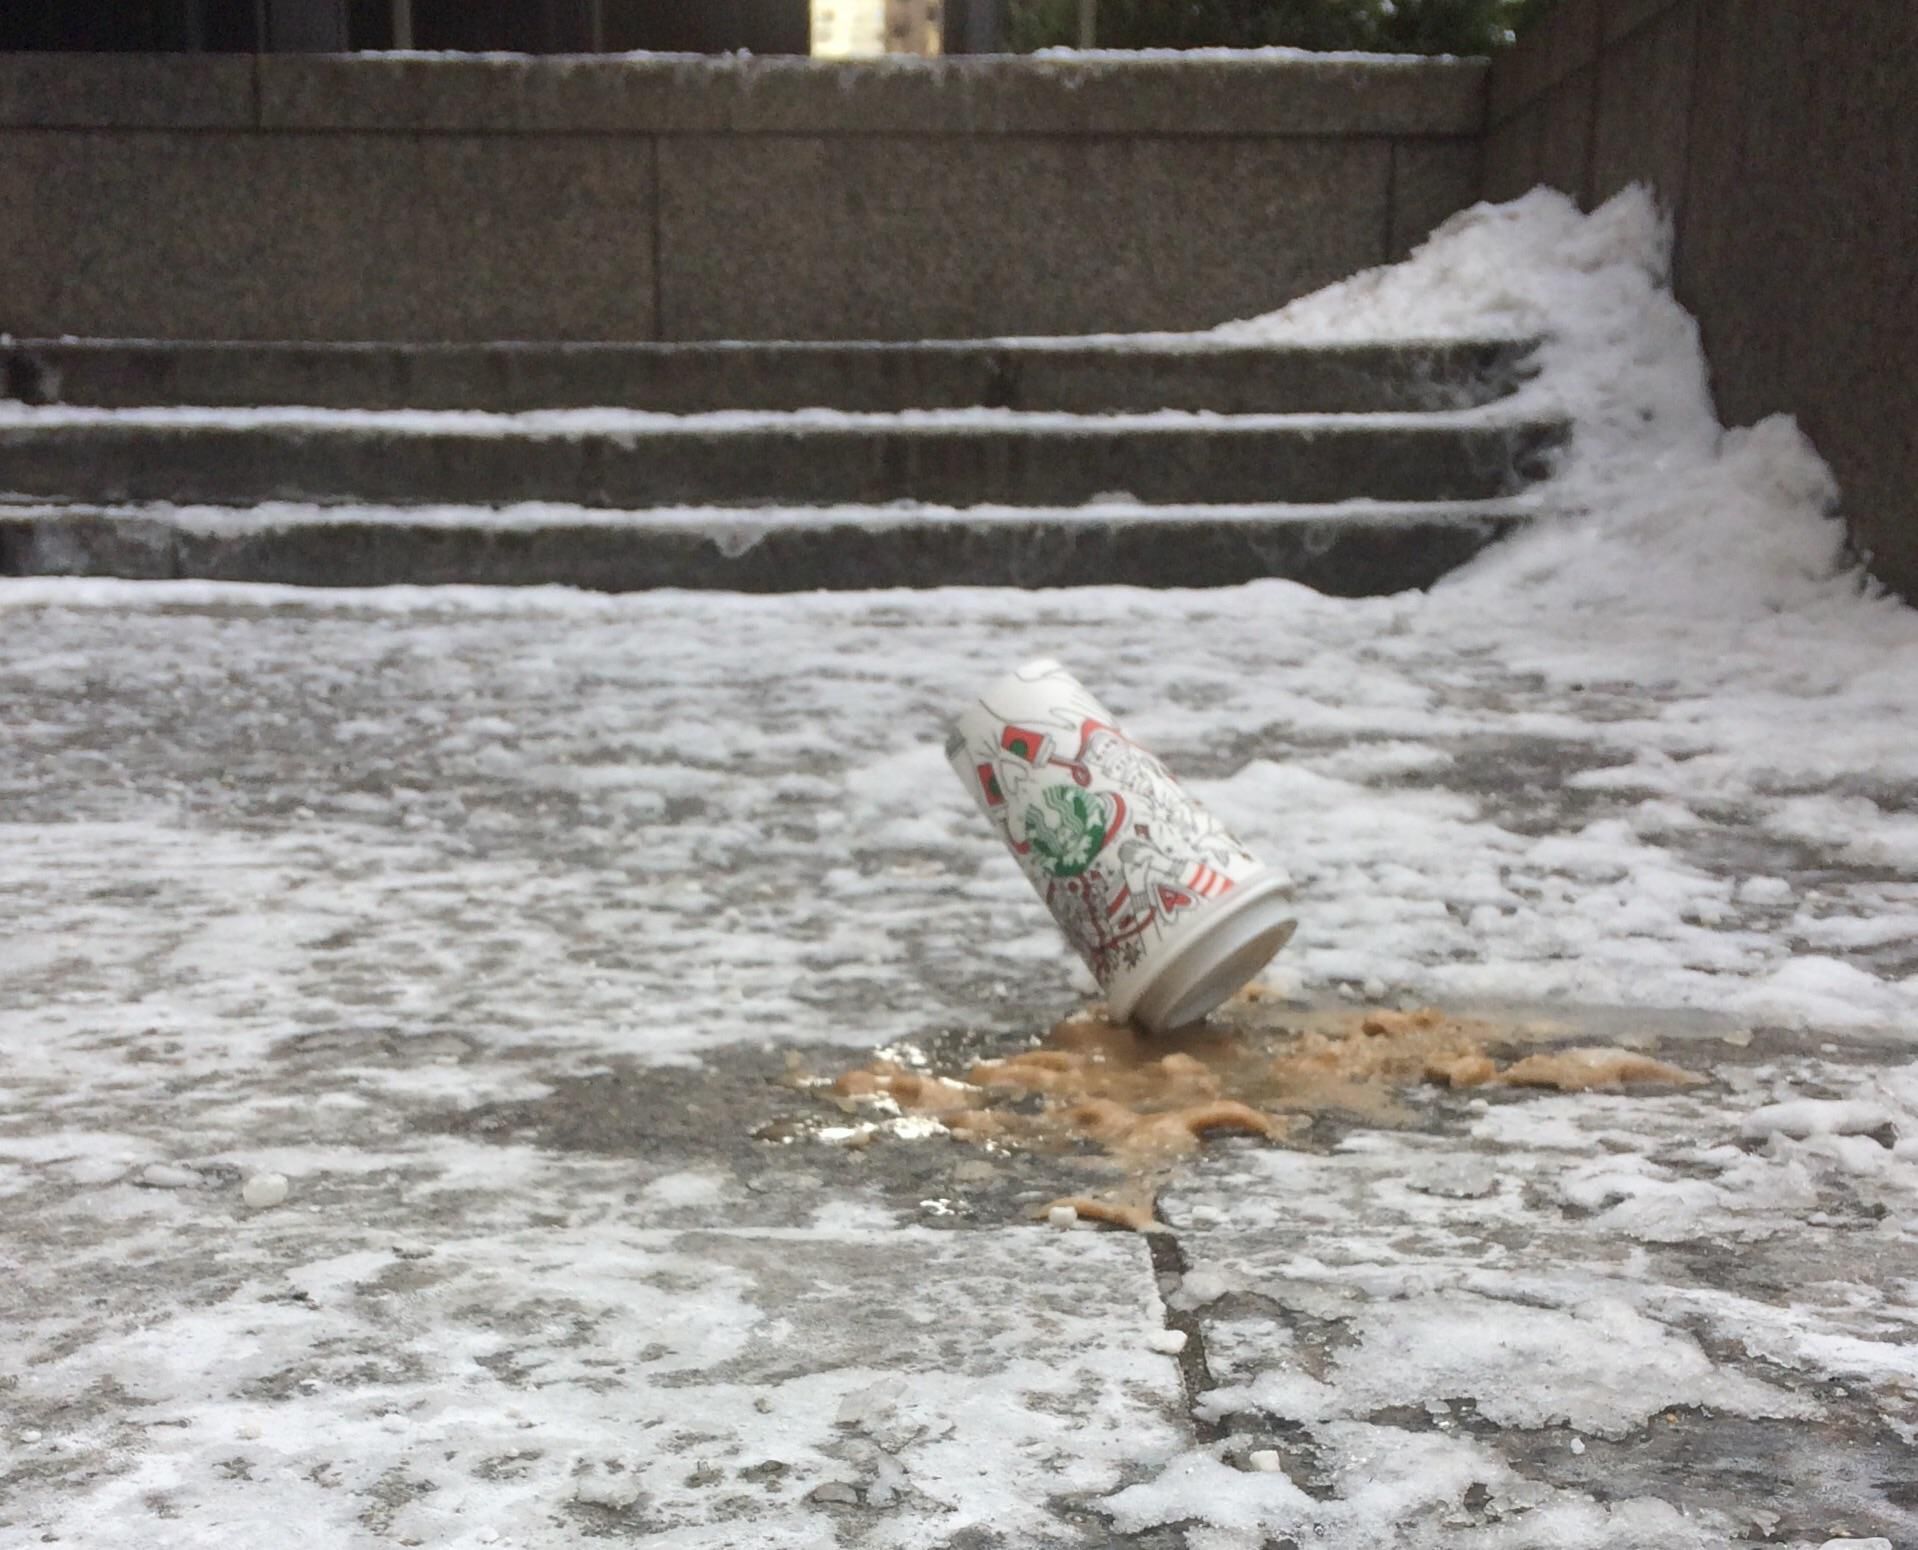 Cold day in Toronto, ON. Found this frozen starbucks cup on a sidewalk.